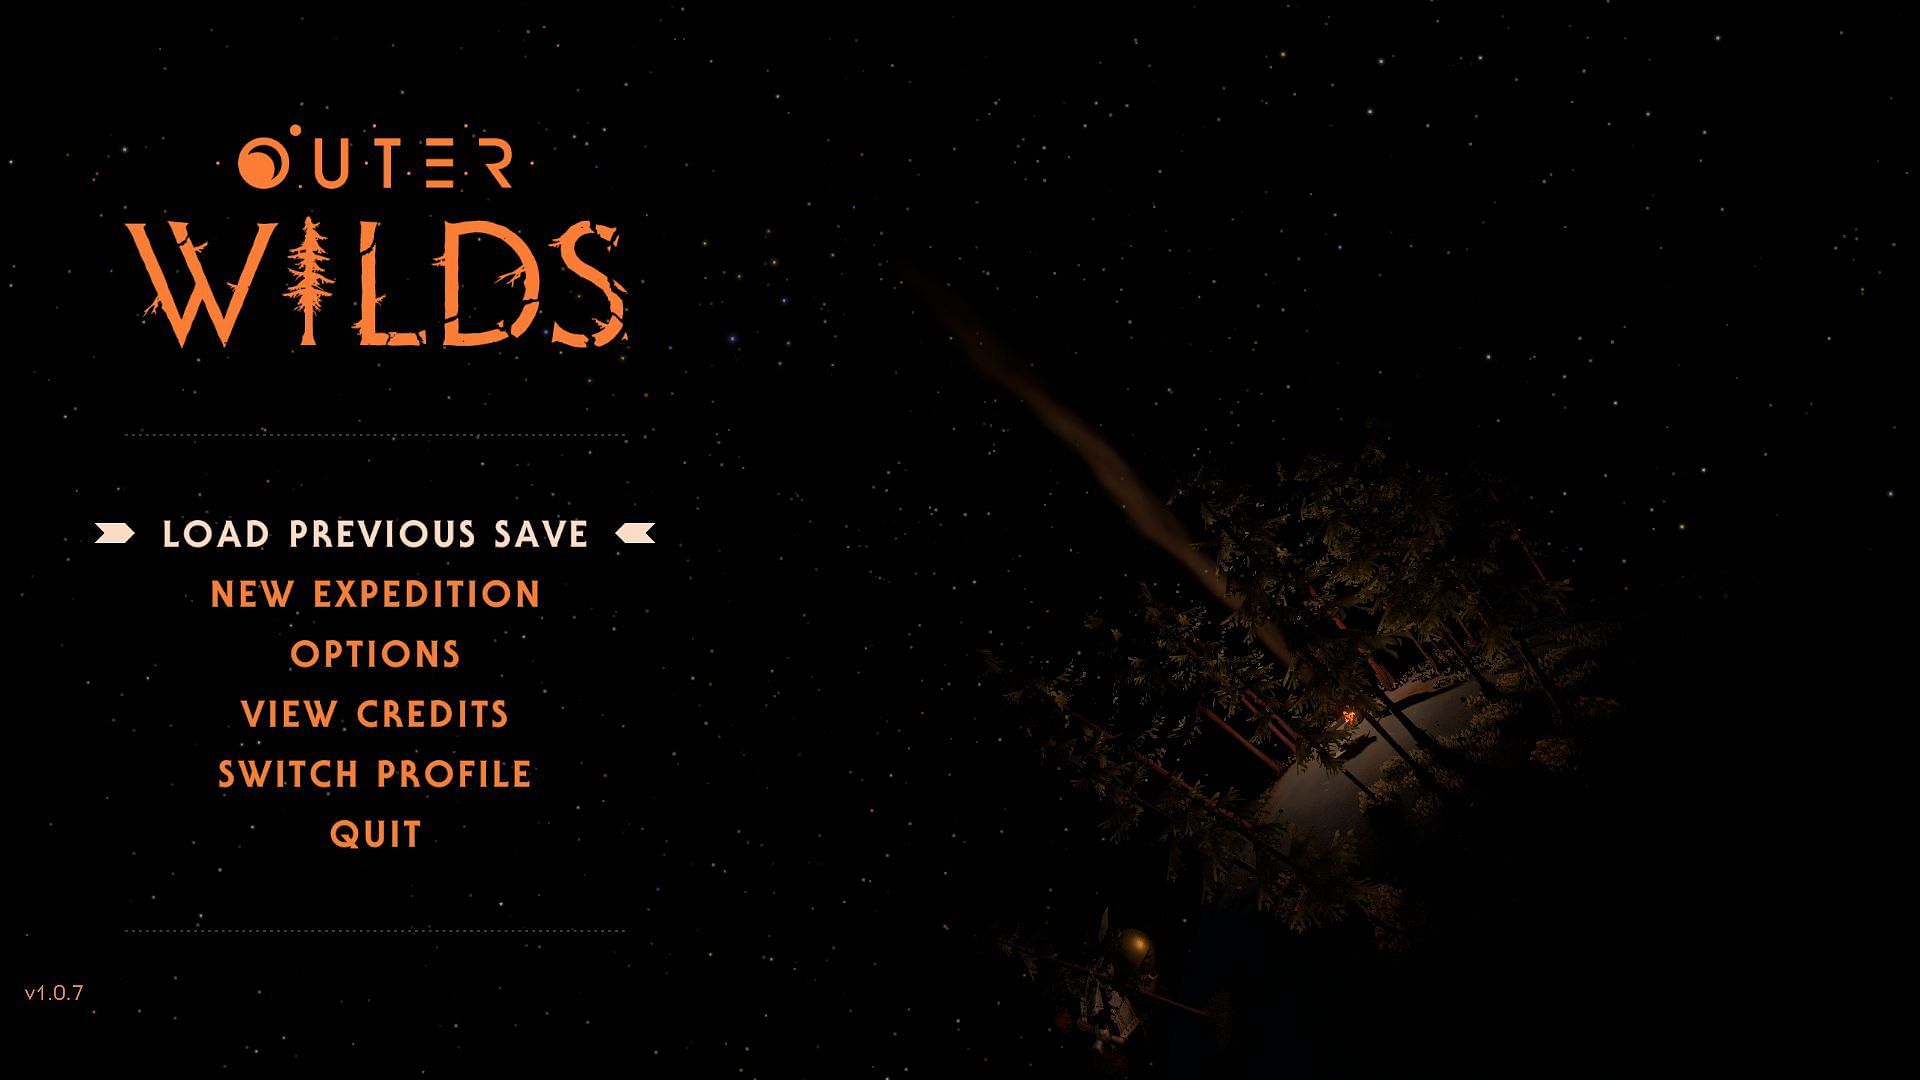 Loading in (Image via Outer Wilds)